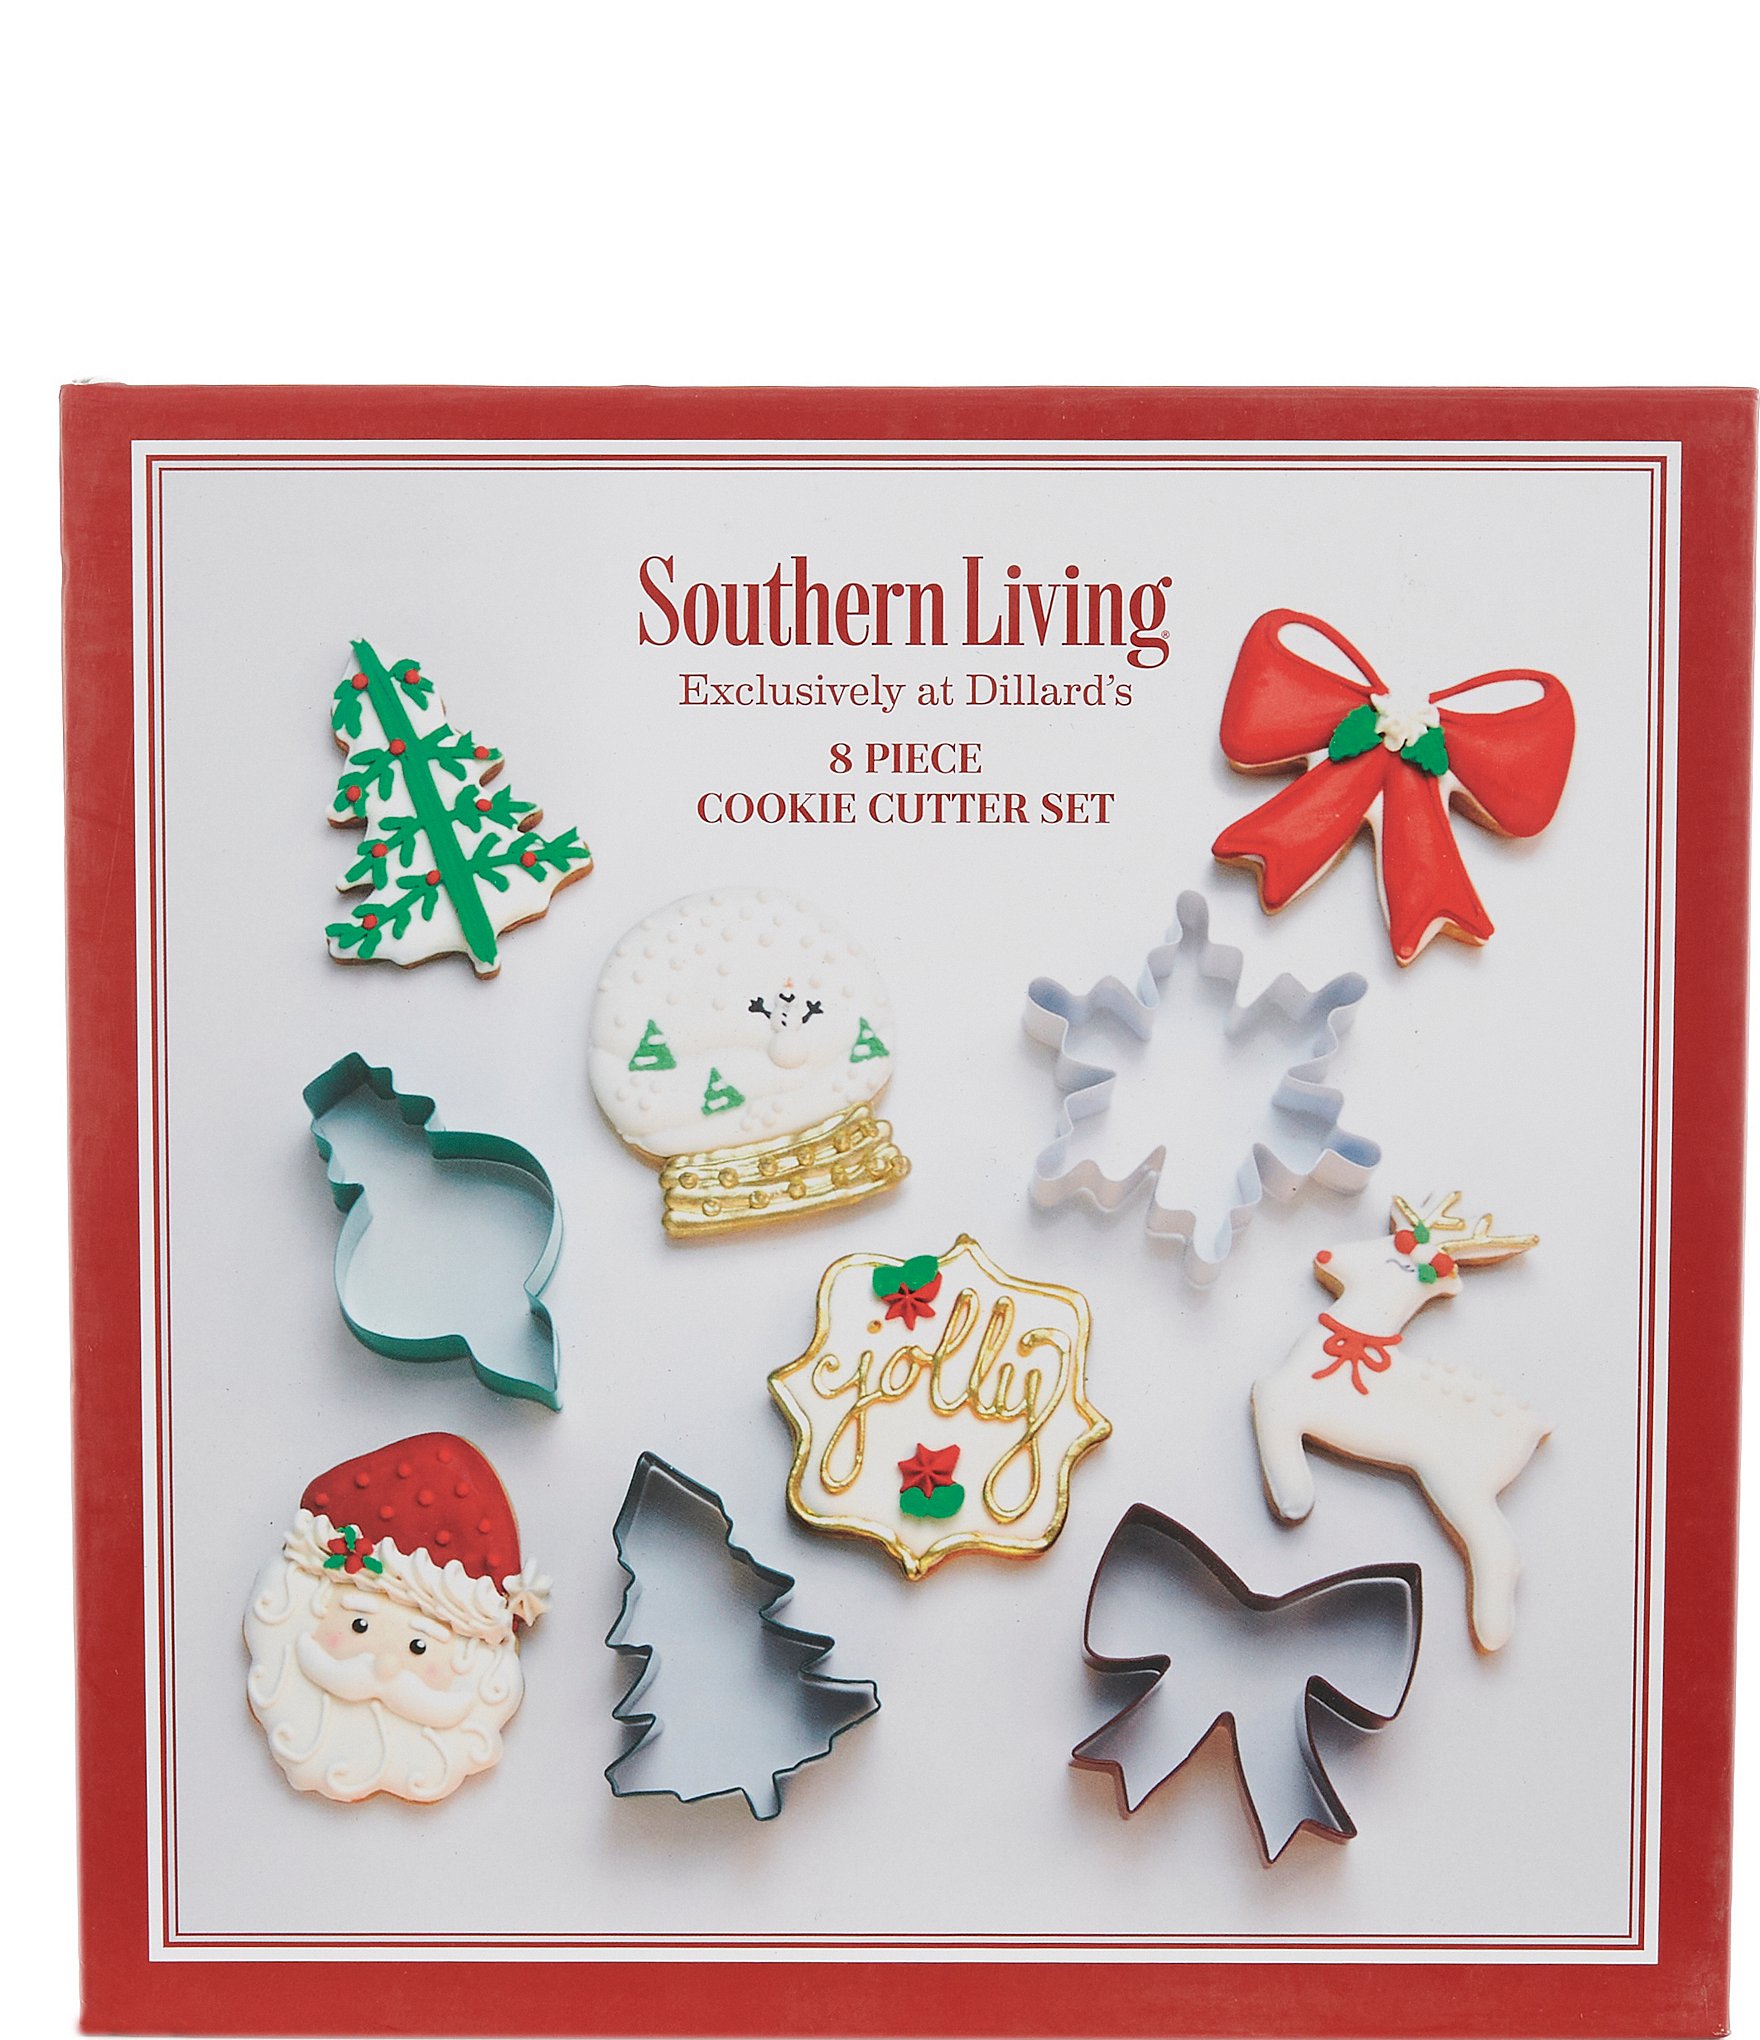 https://dimg.dillards.com/is/image/DillardsZoom/zoom/southern-living-holiday-cookie-cutter-set/00000000_zi_20379545.jpg